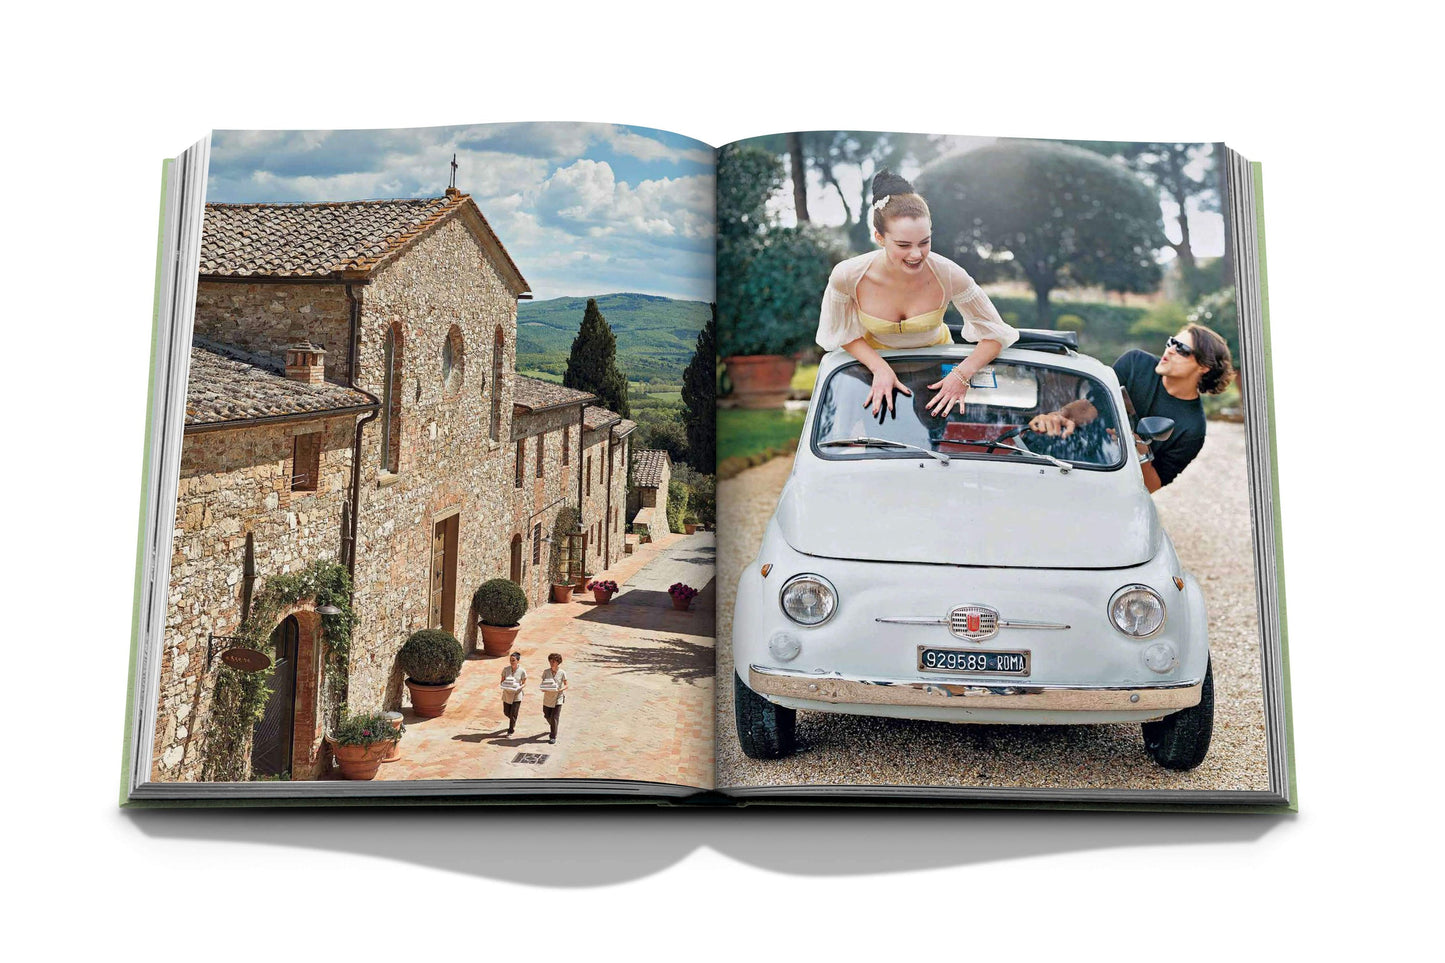 TUSCANY MARVEL COFFEE TABLE BOOK